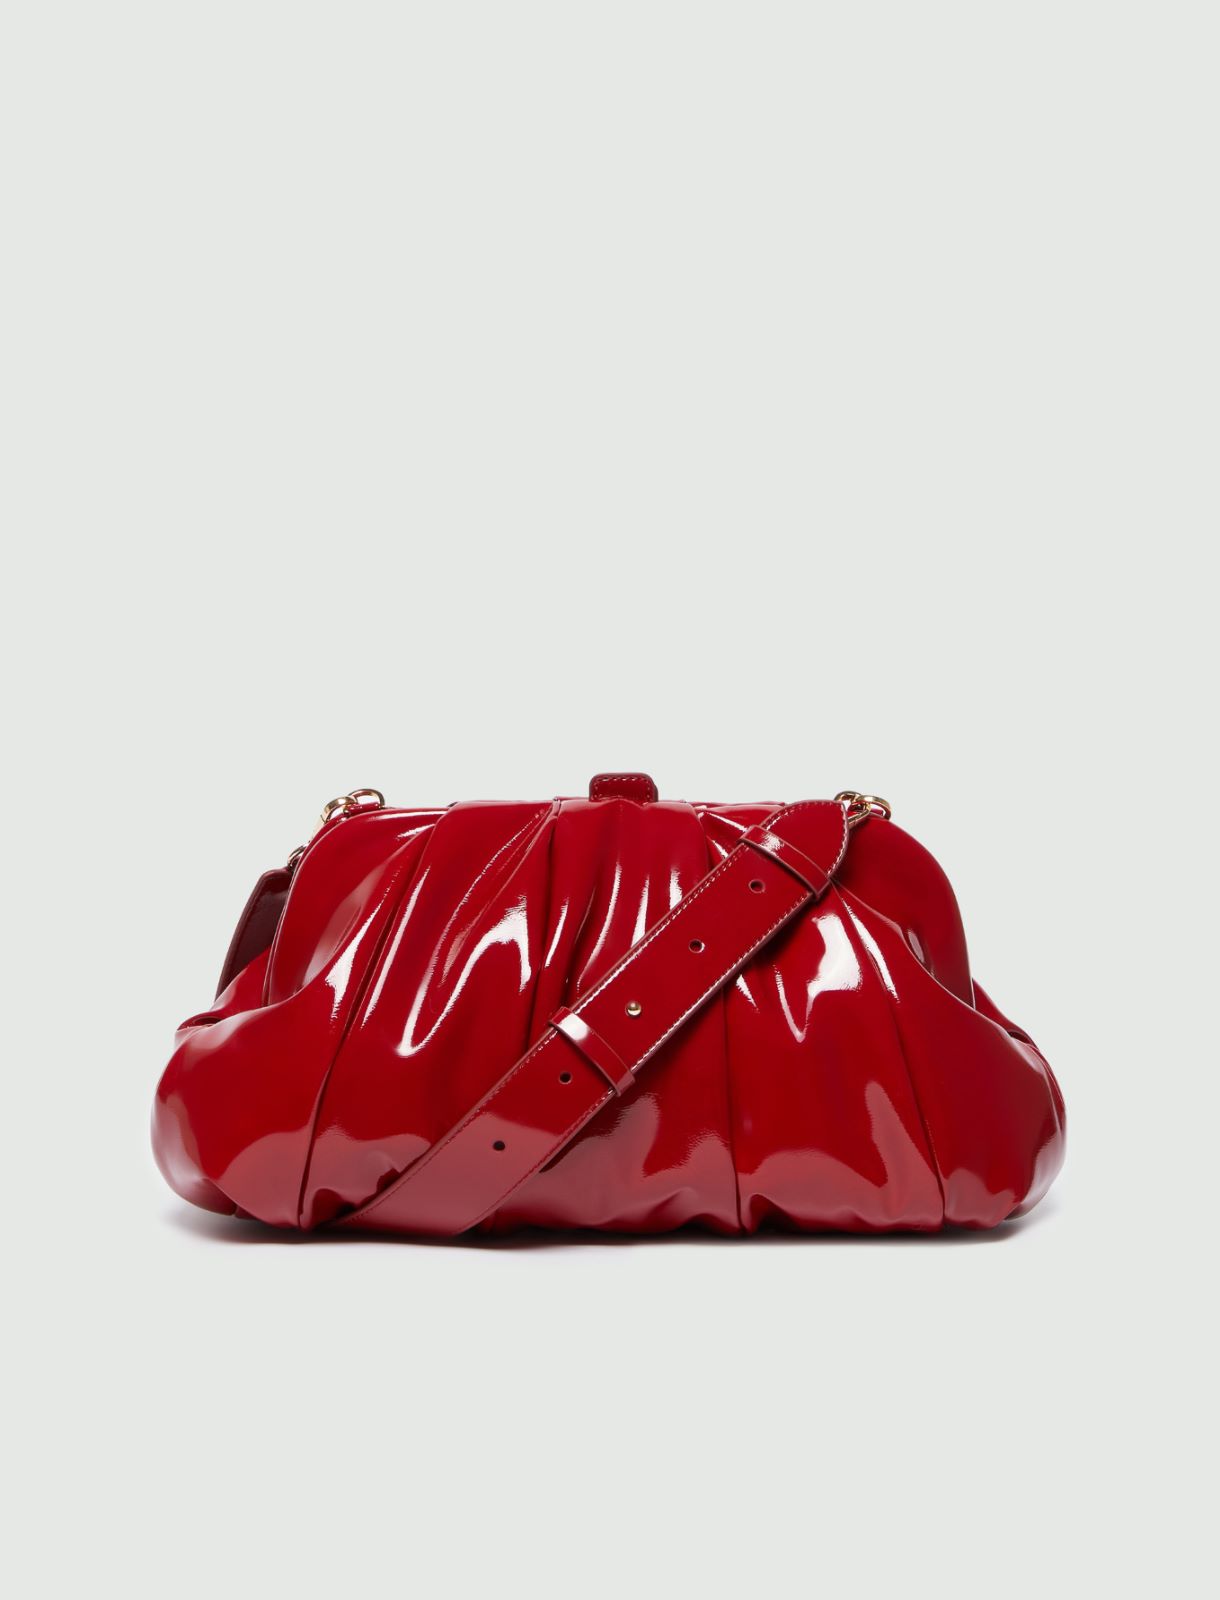 Patent leather bag - Red - Marella